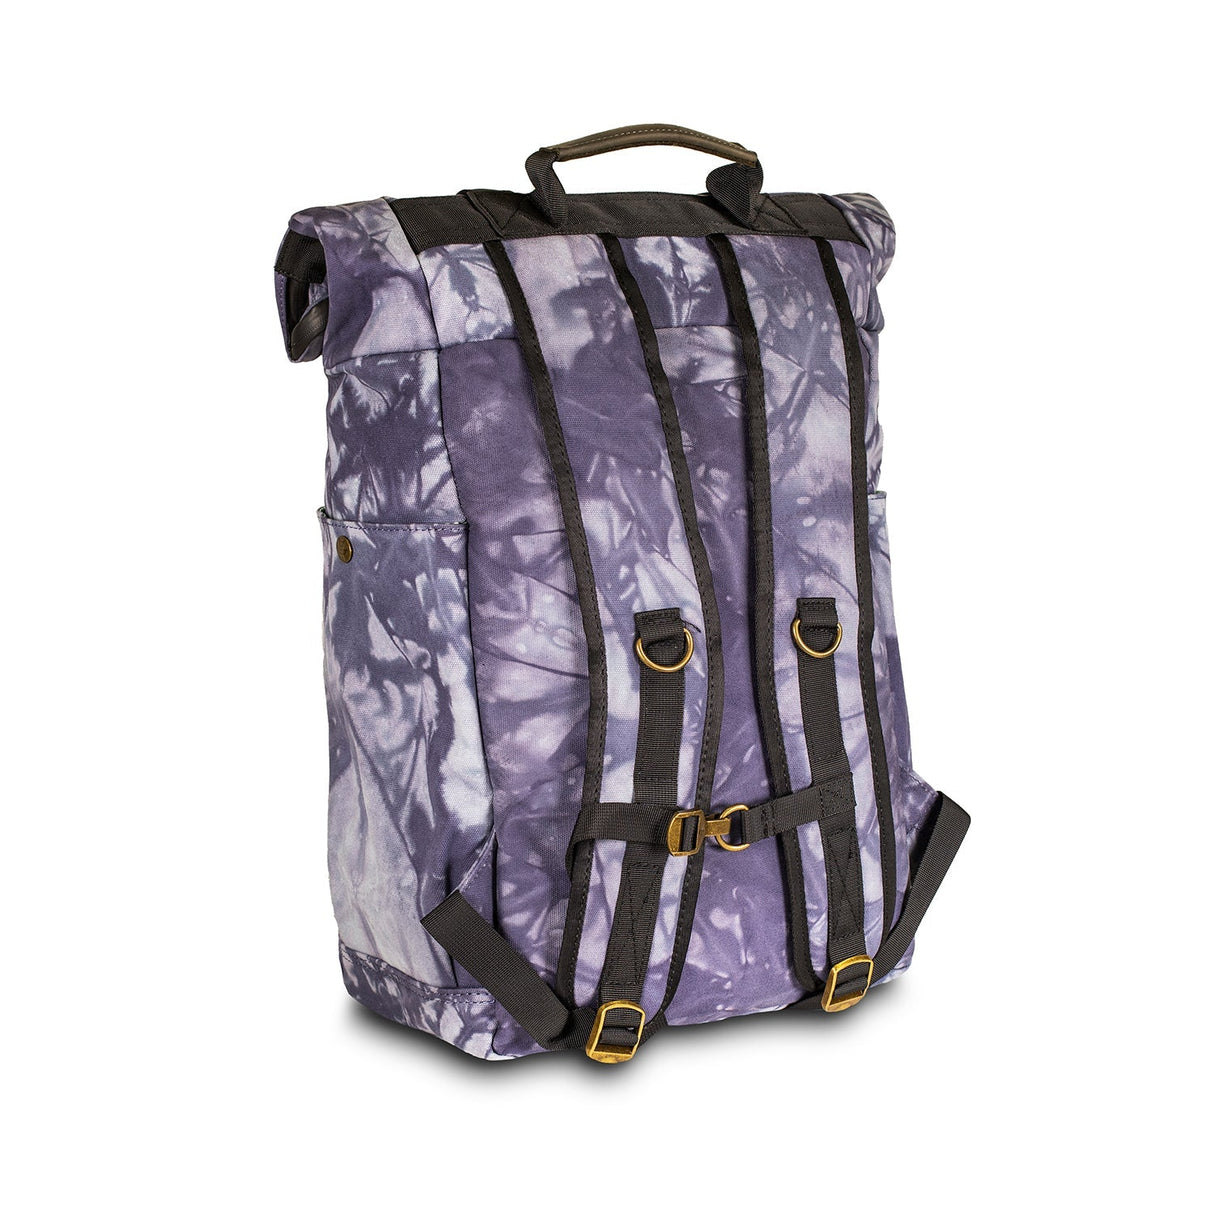 Revelry Drifter - Smell Proof Rolltop Backpack